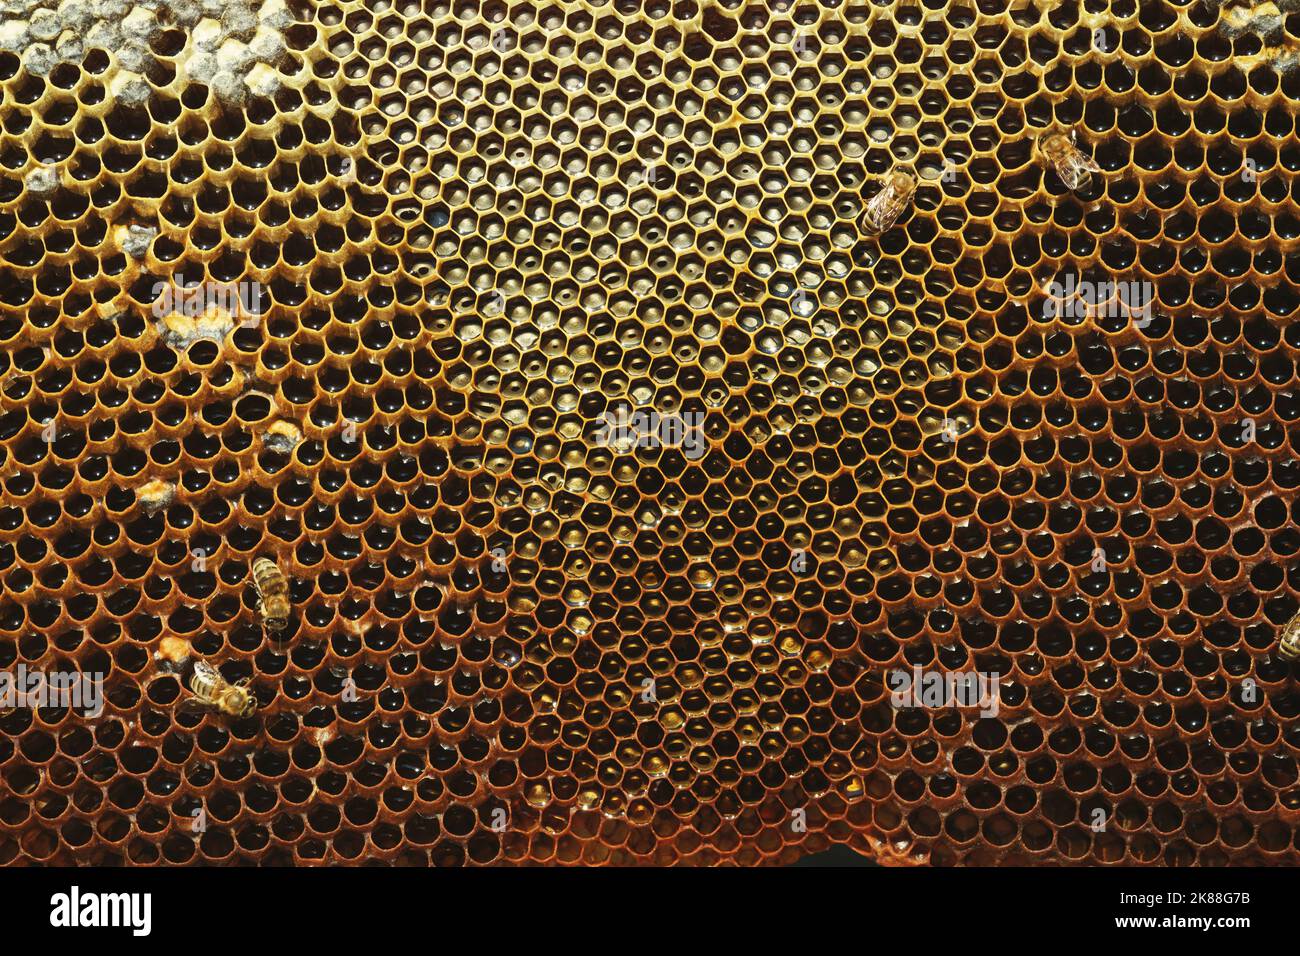 Close up shot of Honeycomb background texture with some bees and baby bees on it Stock Photo